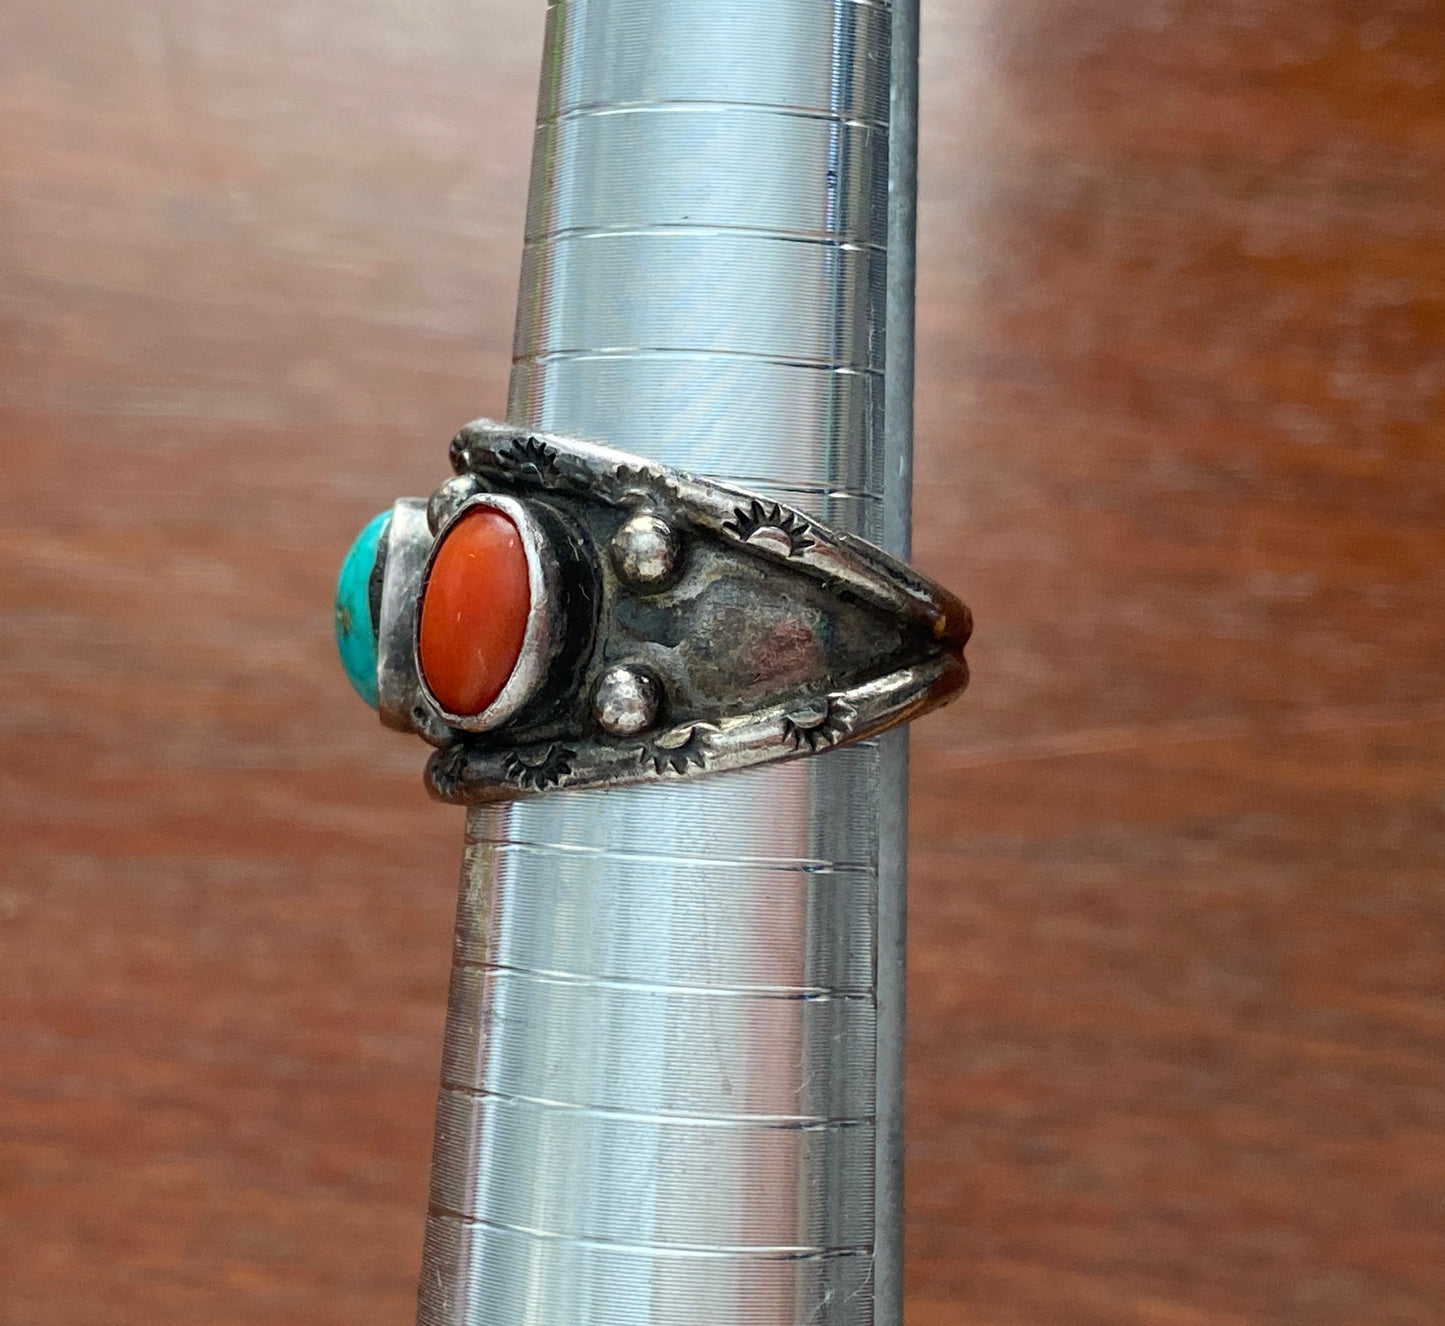 Signed JB Old Pawn Sterling Silver 925 3 Stone Turquoise Red Coral Ring Sz 7.25